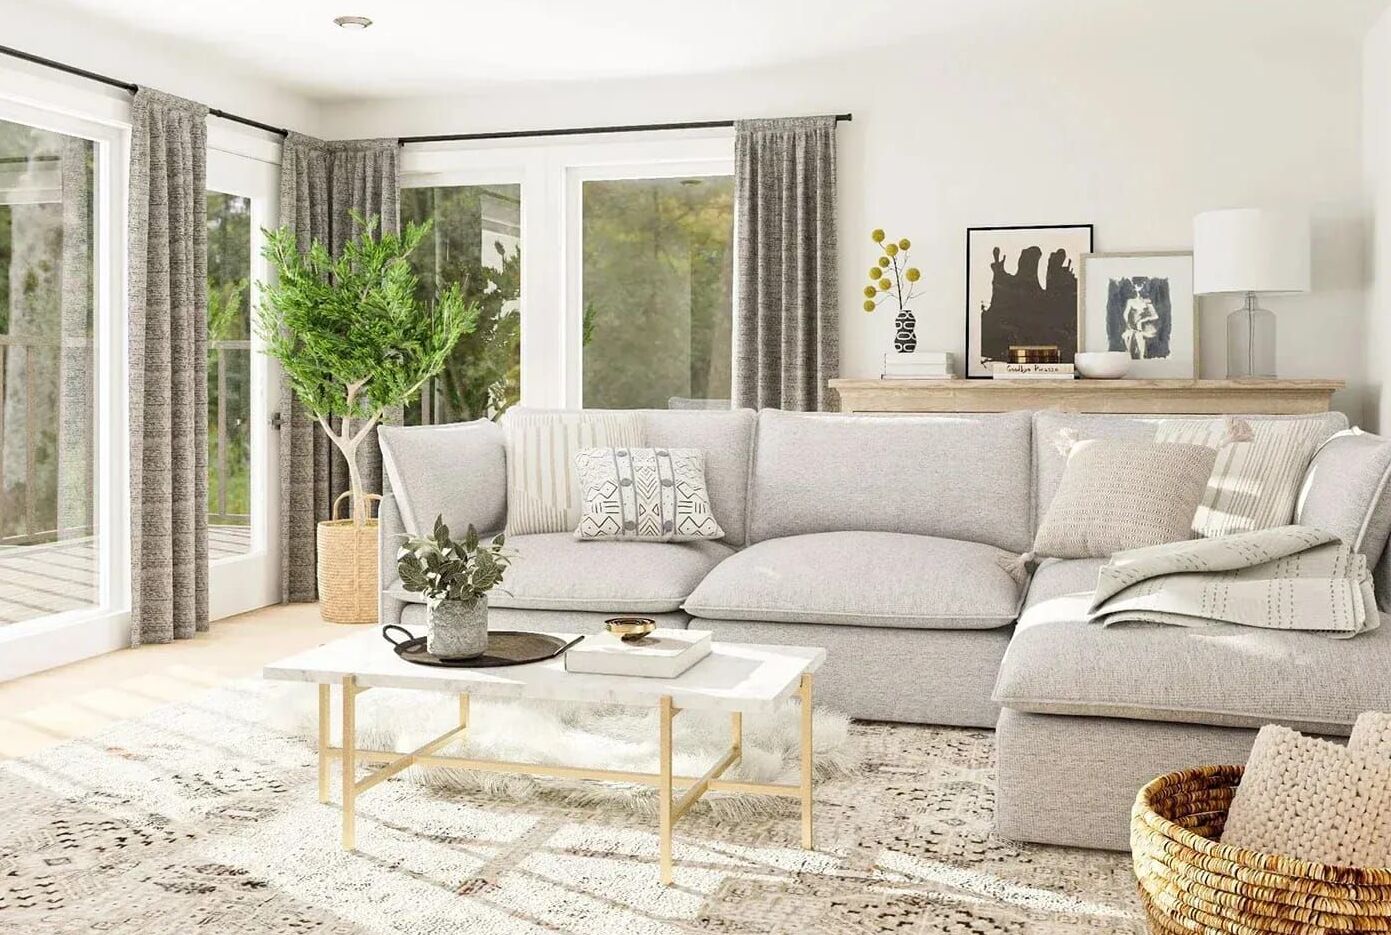 Contemporary Living Room and Scandinavian Touches